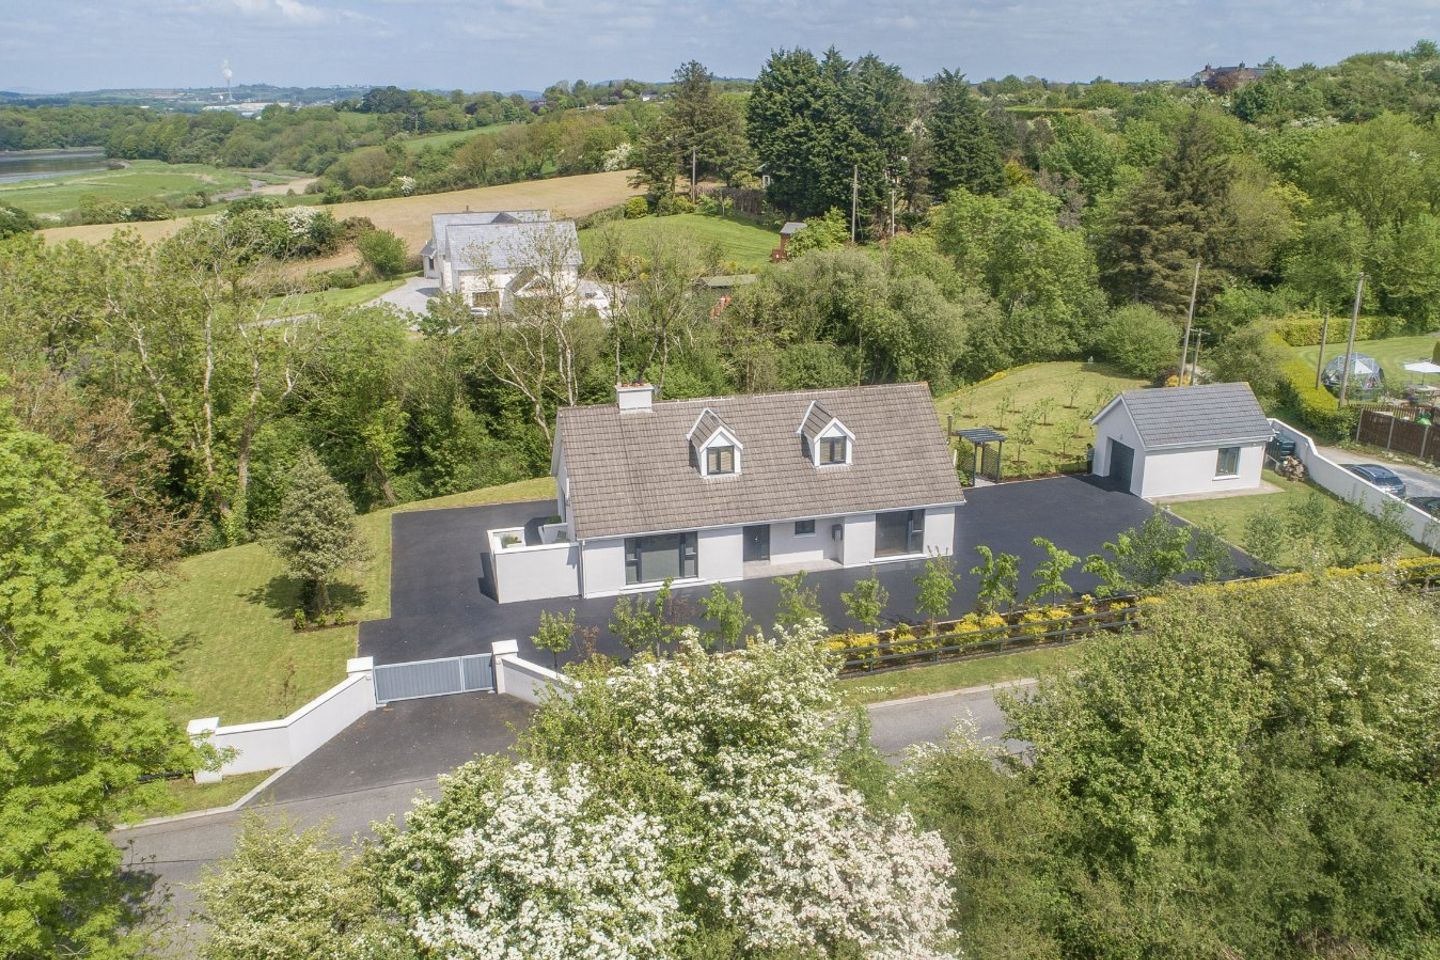 Millstream Cottage, Knockboy, Dunmore Road, Waterford City, Co. Waterford, X91RN87